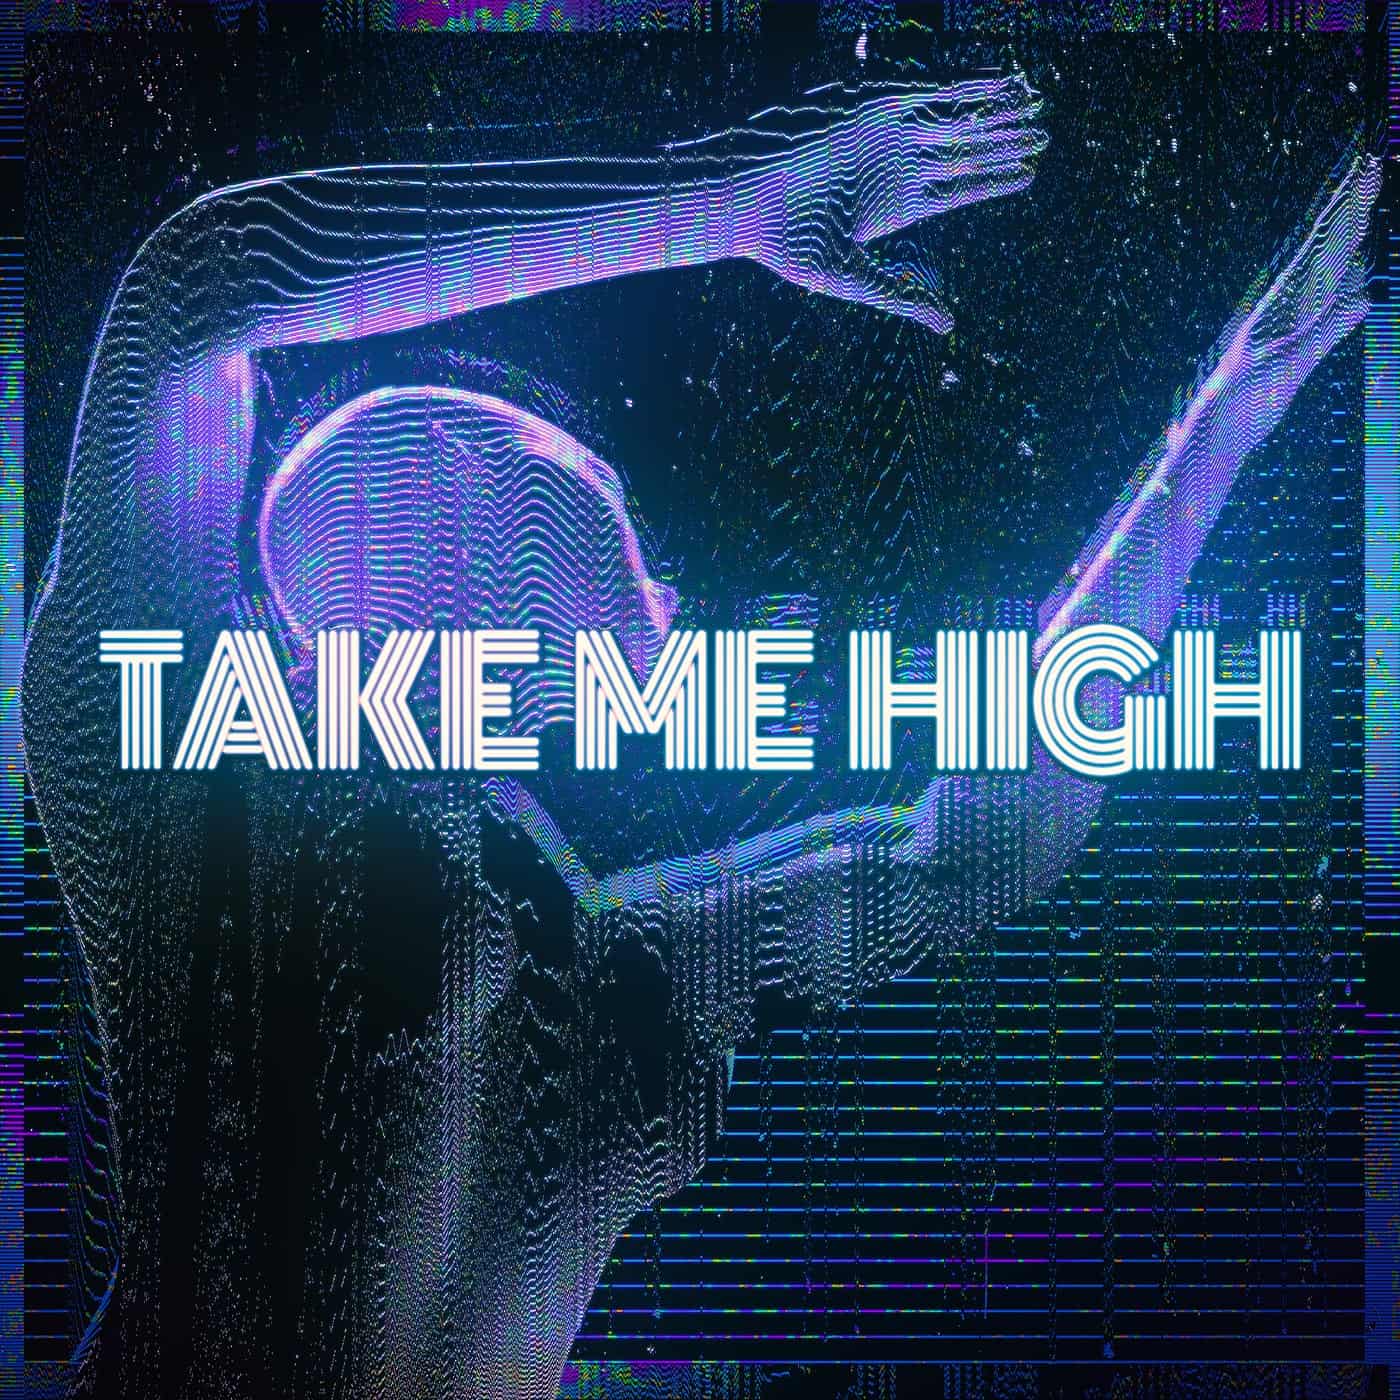 image cover: Kaskade, deadmau5, Kx5 - Take Me High (Extended Mix Beatport Exclusive) / MAU50505X